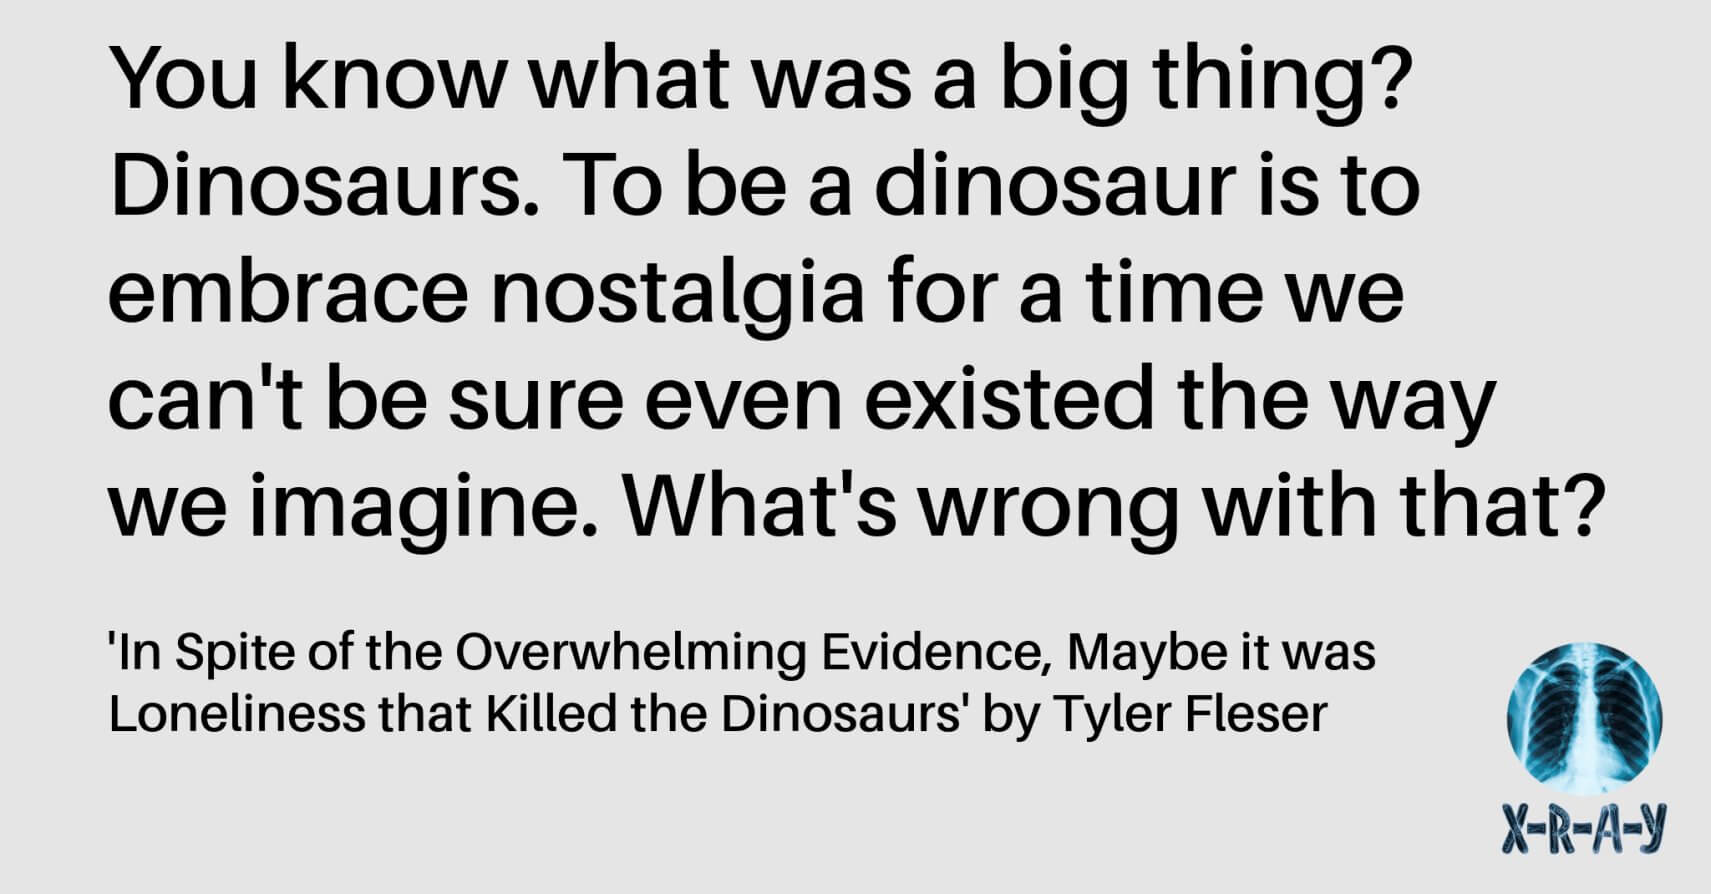 IN SPITE OF THE OVERWHELMING EVIDENCE, MAYBE IT WAS LONELINESS THAT KILLED THE DINOSAURS by Tyler Fleser